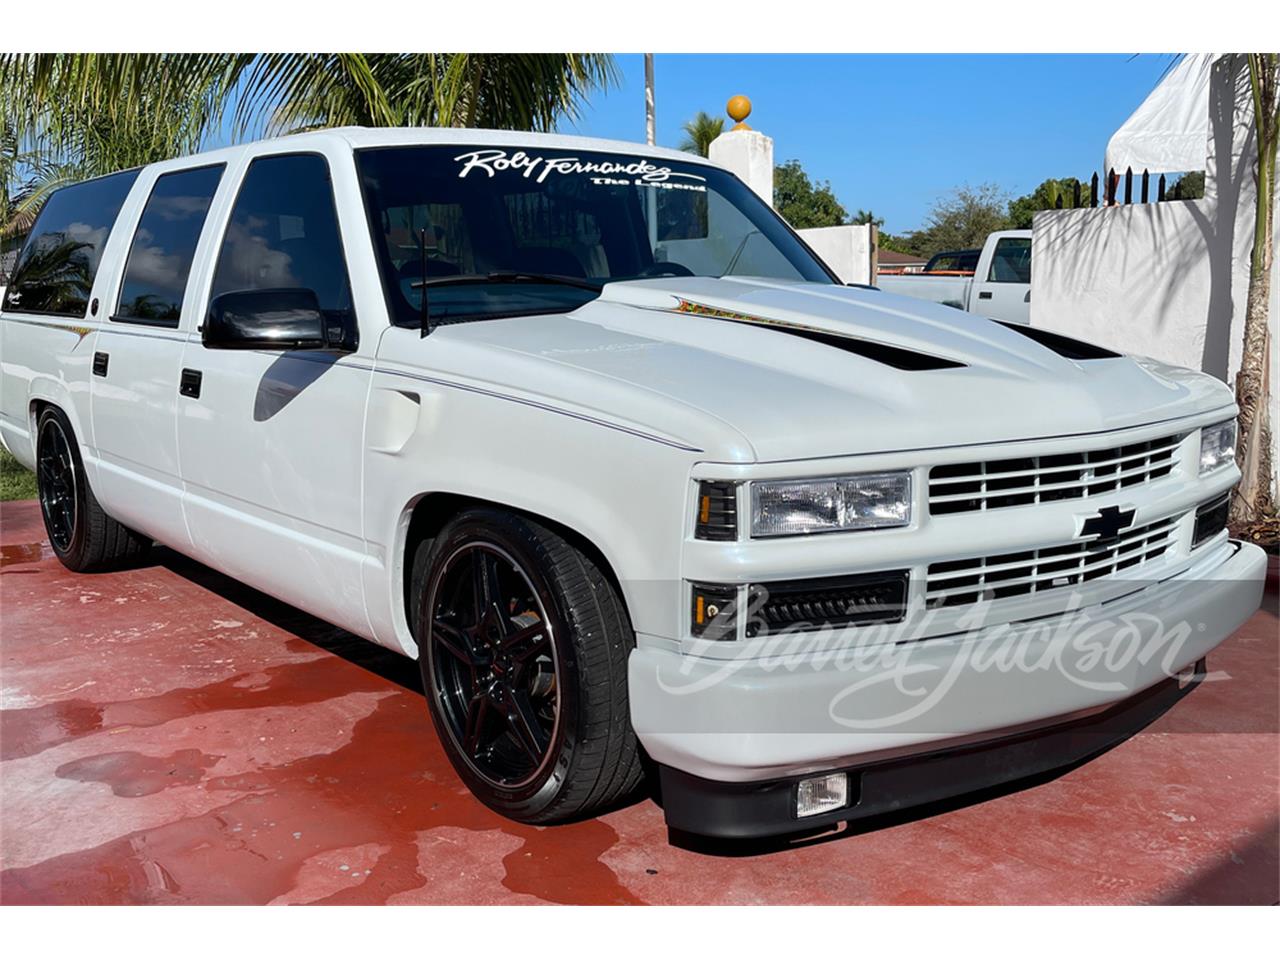 For Sale at Auction: 1998 Chevrolet Suburban in Las Vegas, Nevada for sale in Las Vegas, NV